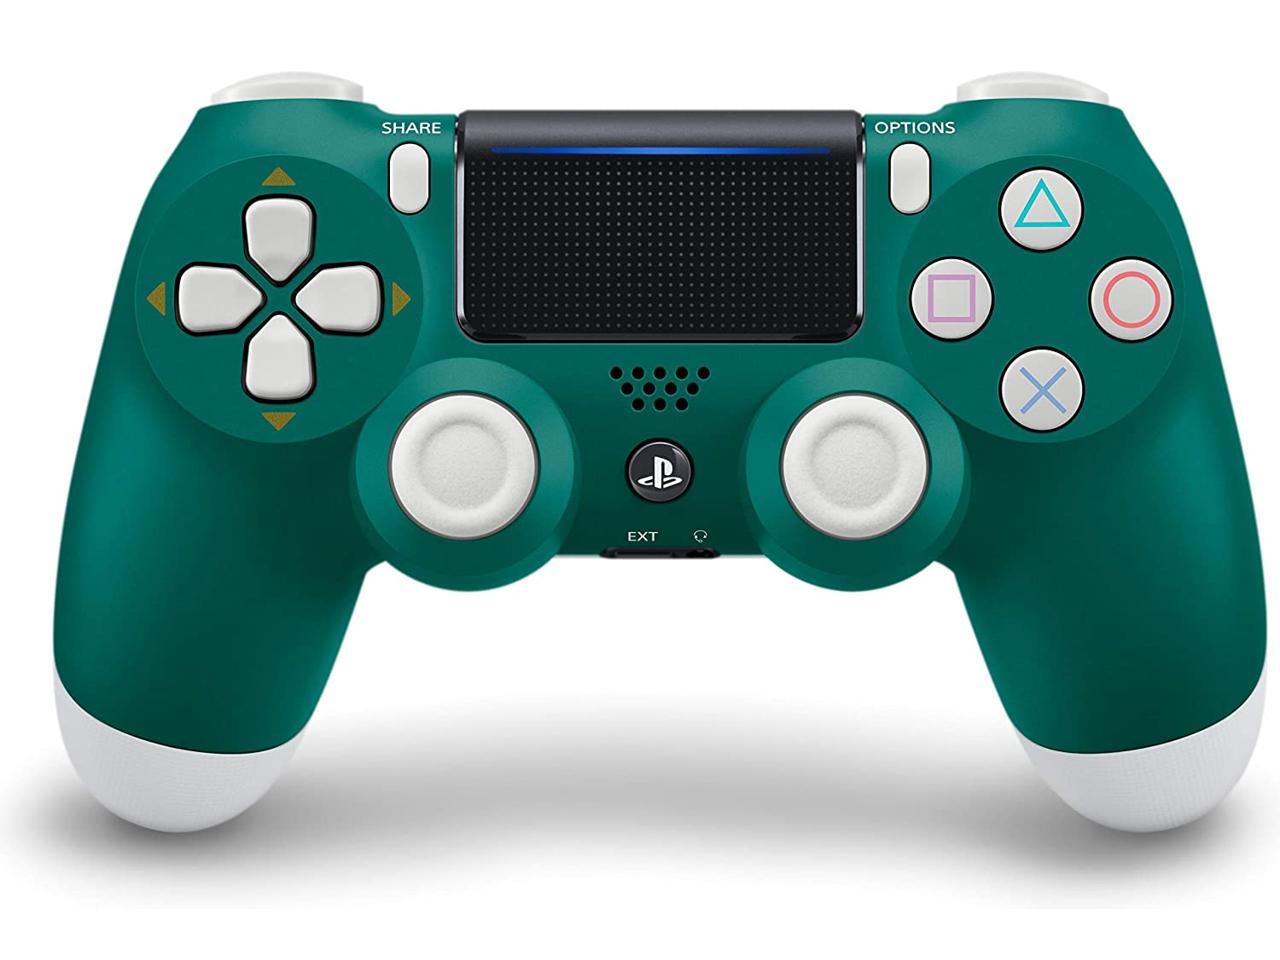 PS4 Wireless Controller Game Pad for SONY PlayStation 4 Dualshock - Alpine Green,Hot PS4 Wireless Controller Game Pad for SONY PlayStation Dualshock 4 Camouflage